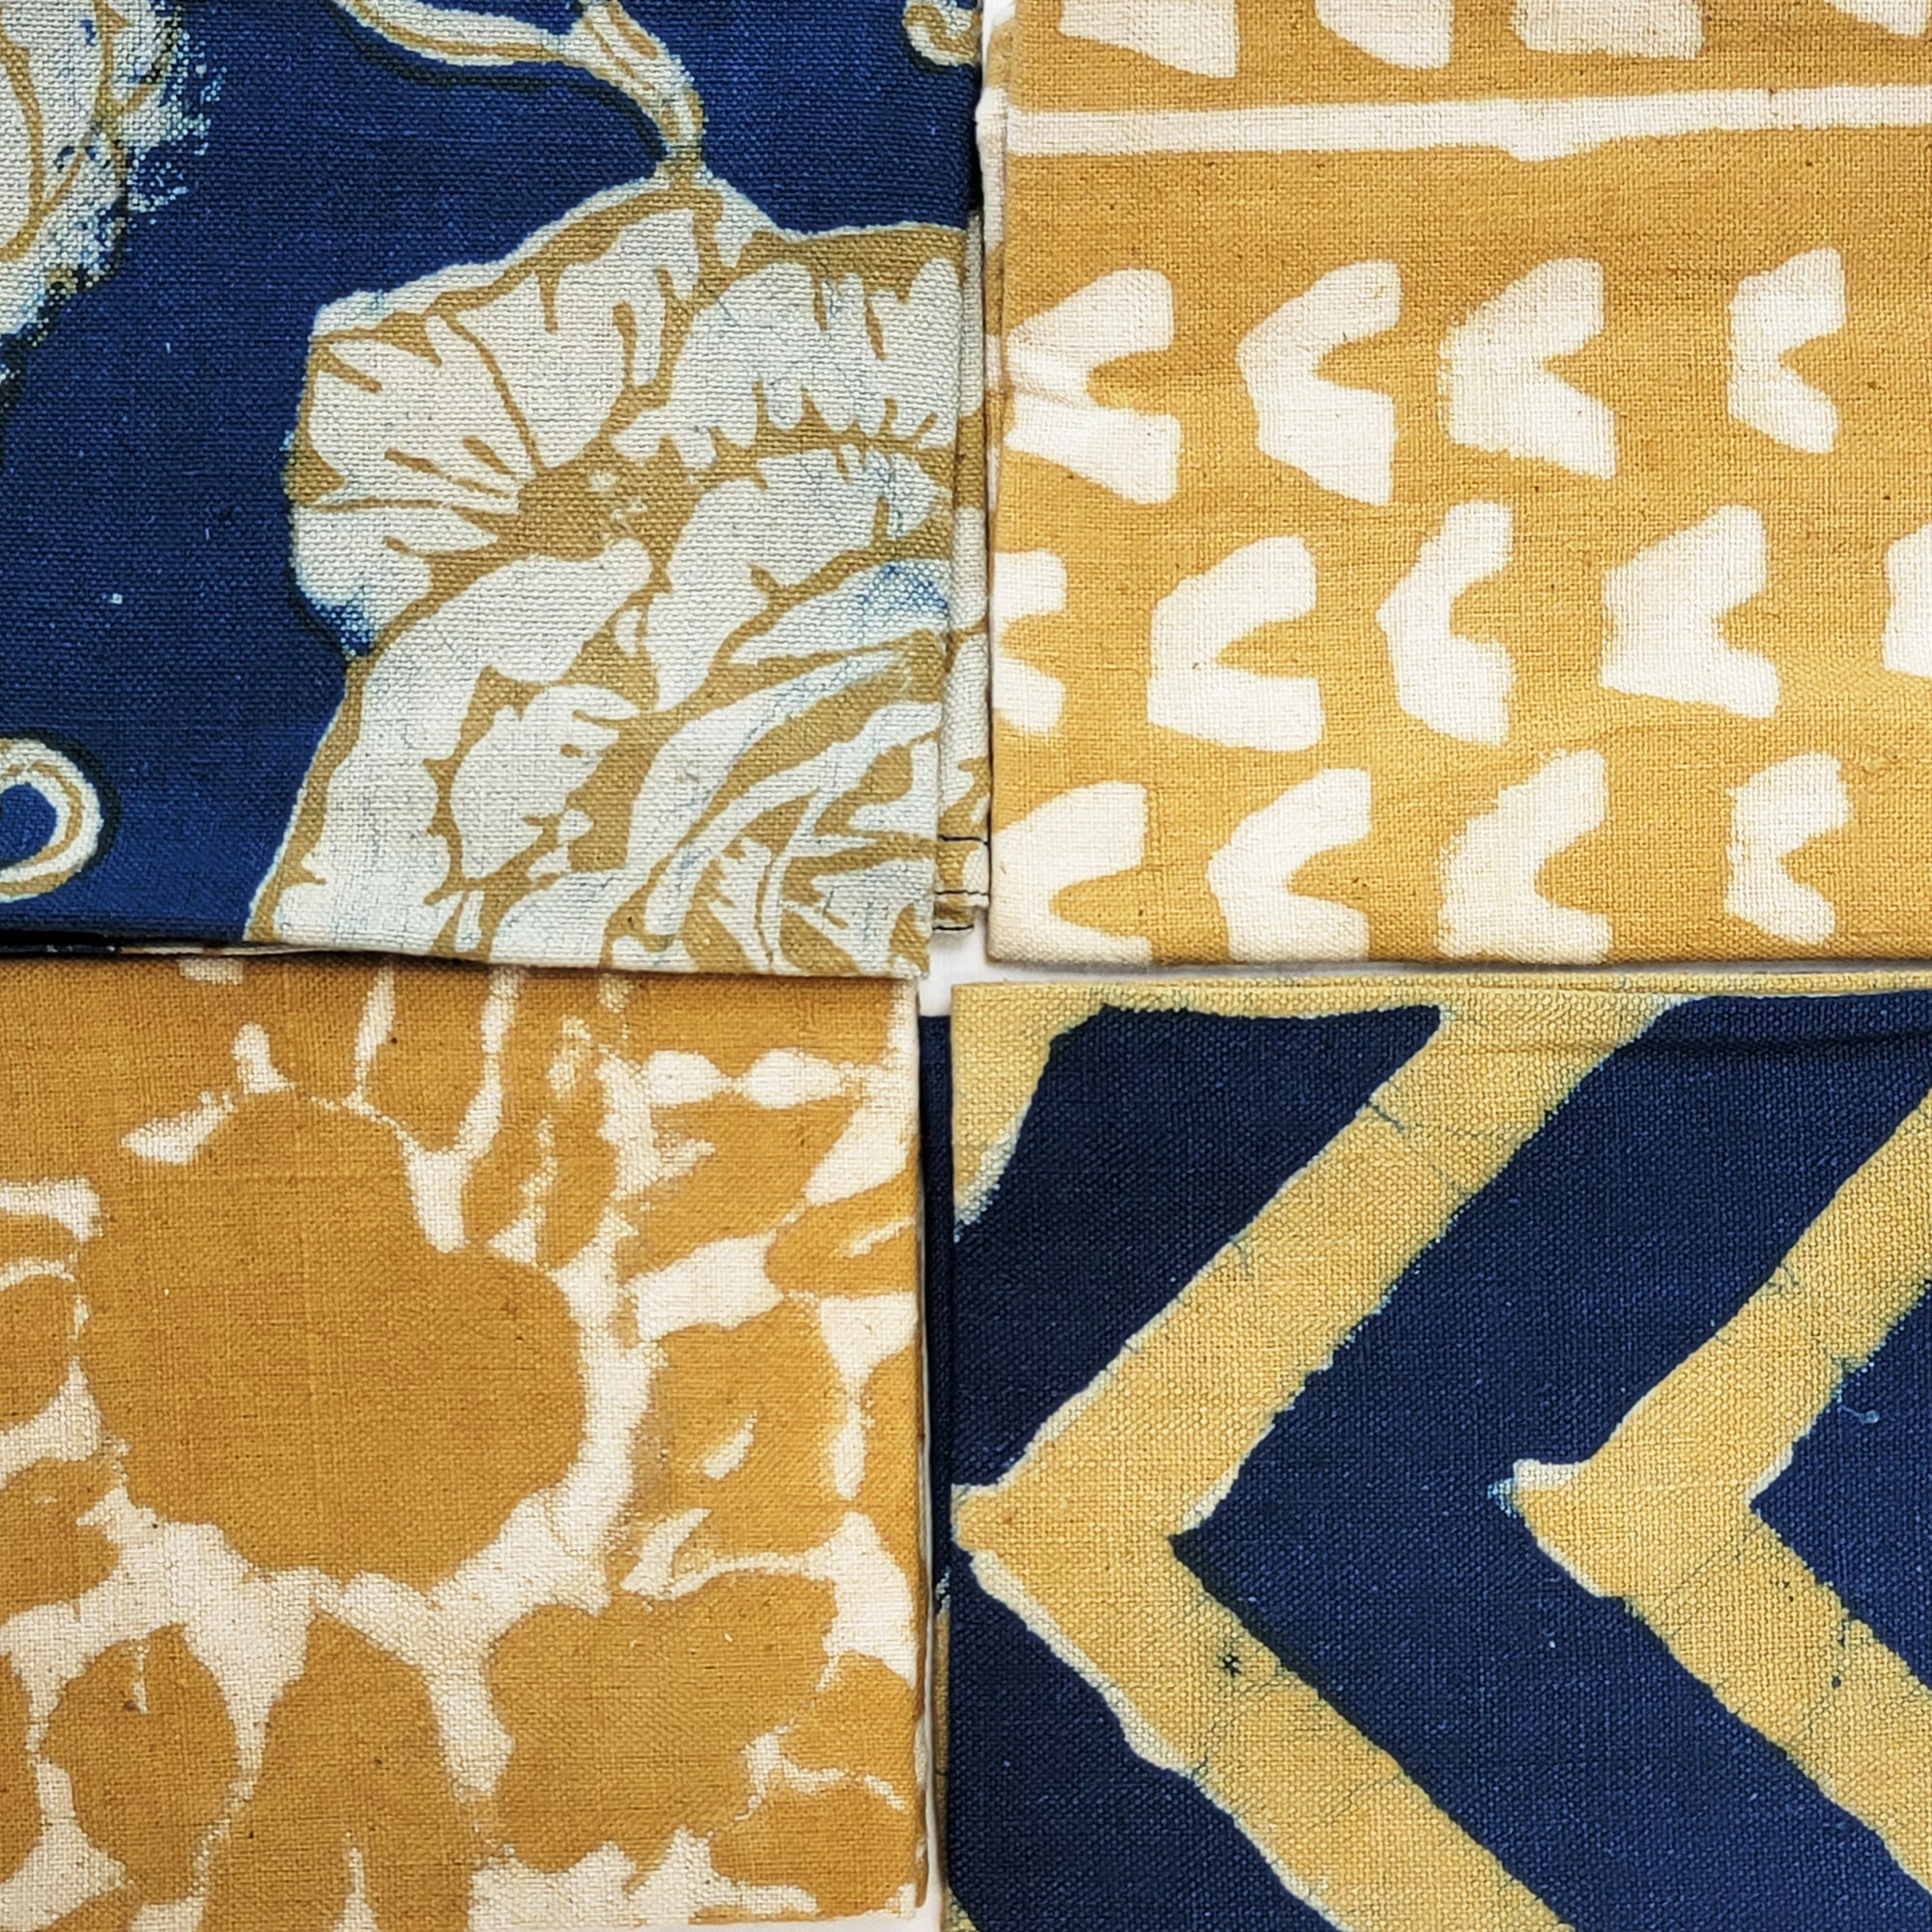 Oceanic blue and gold mix and match block print napkins